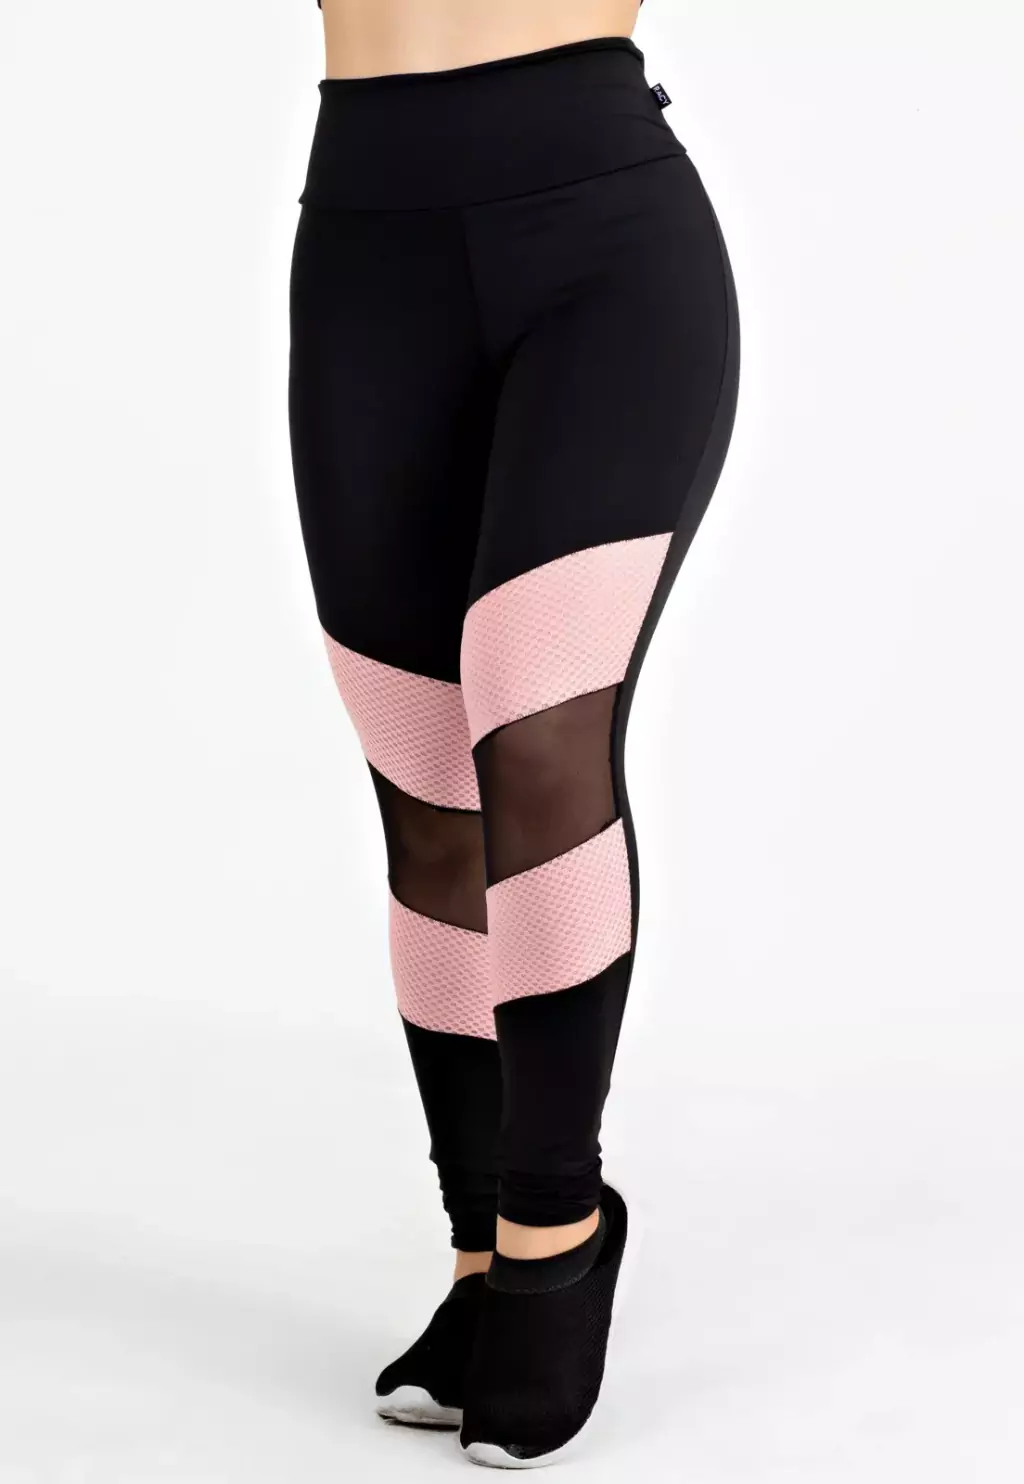 Why do women wear leggings that are transparent? - Quora